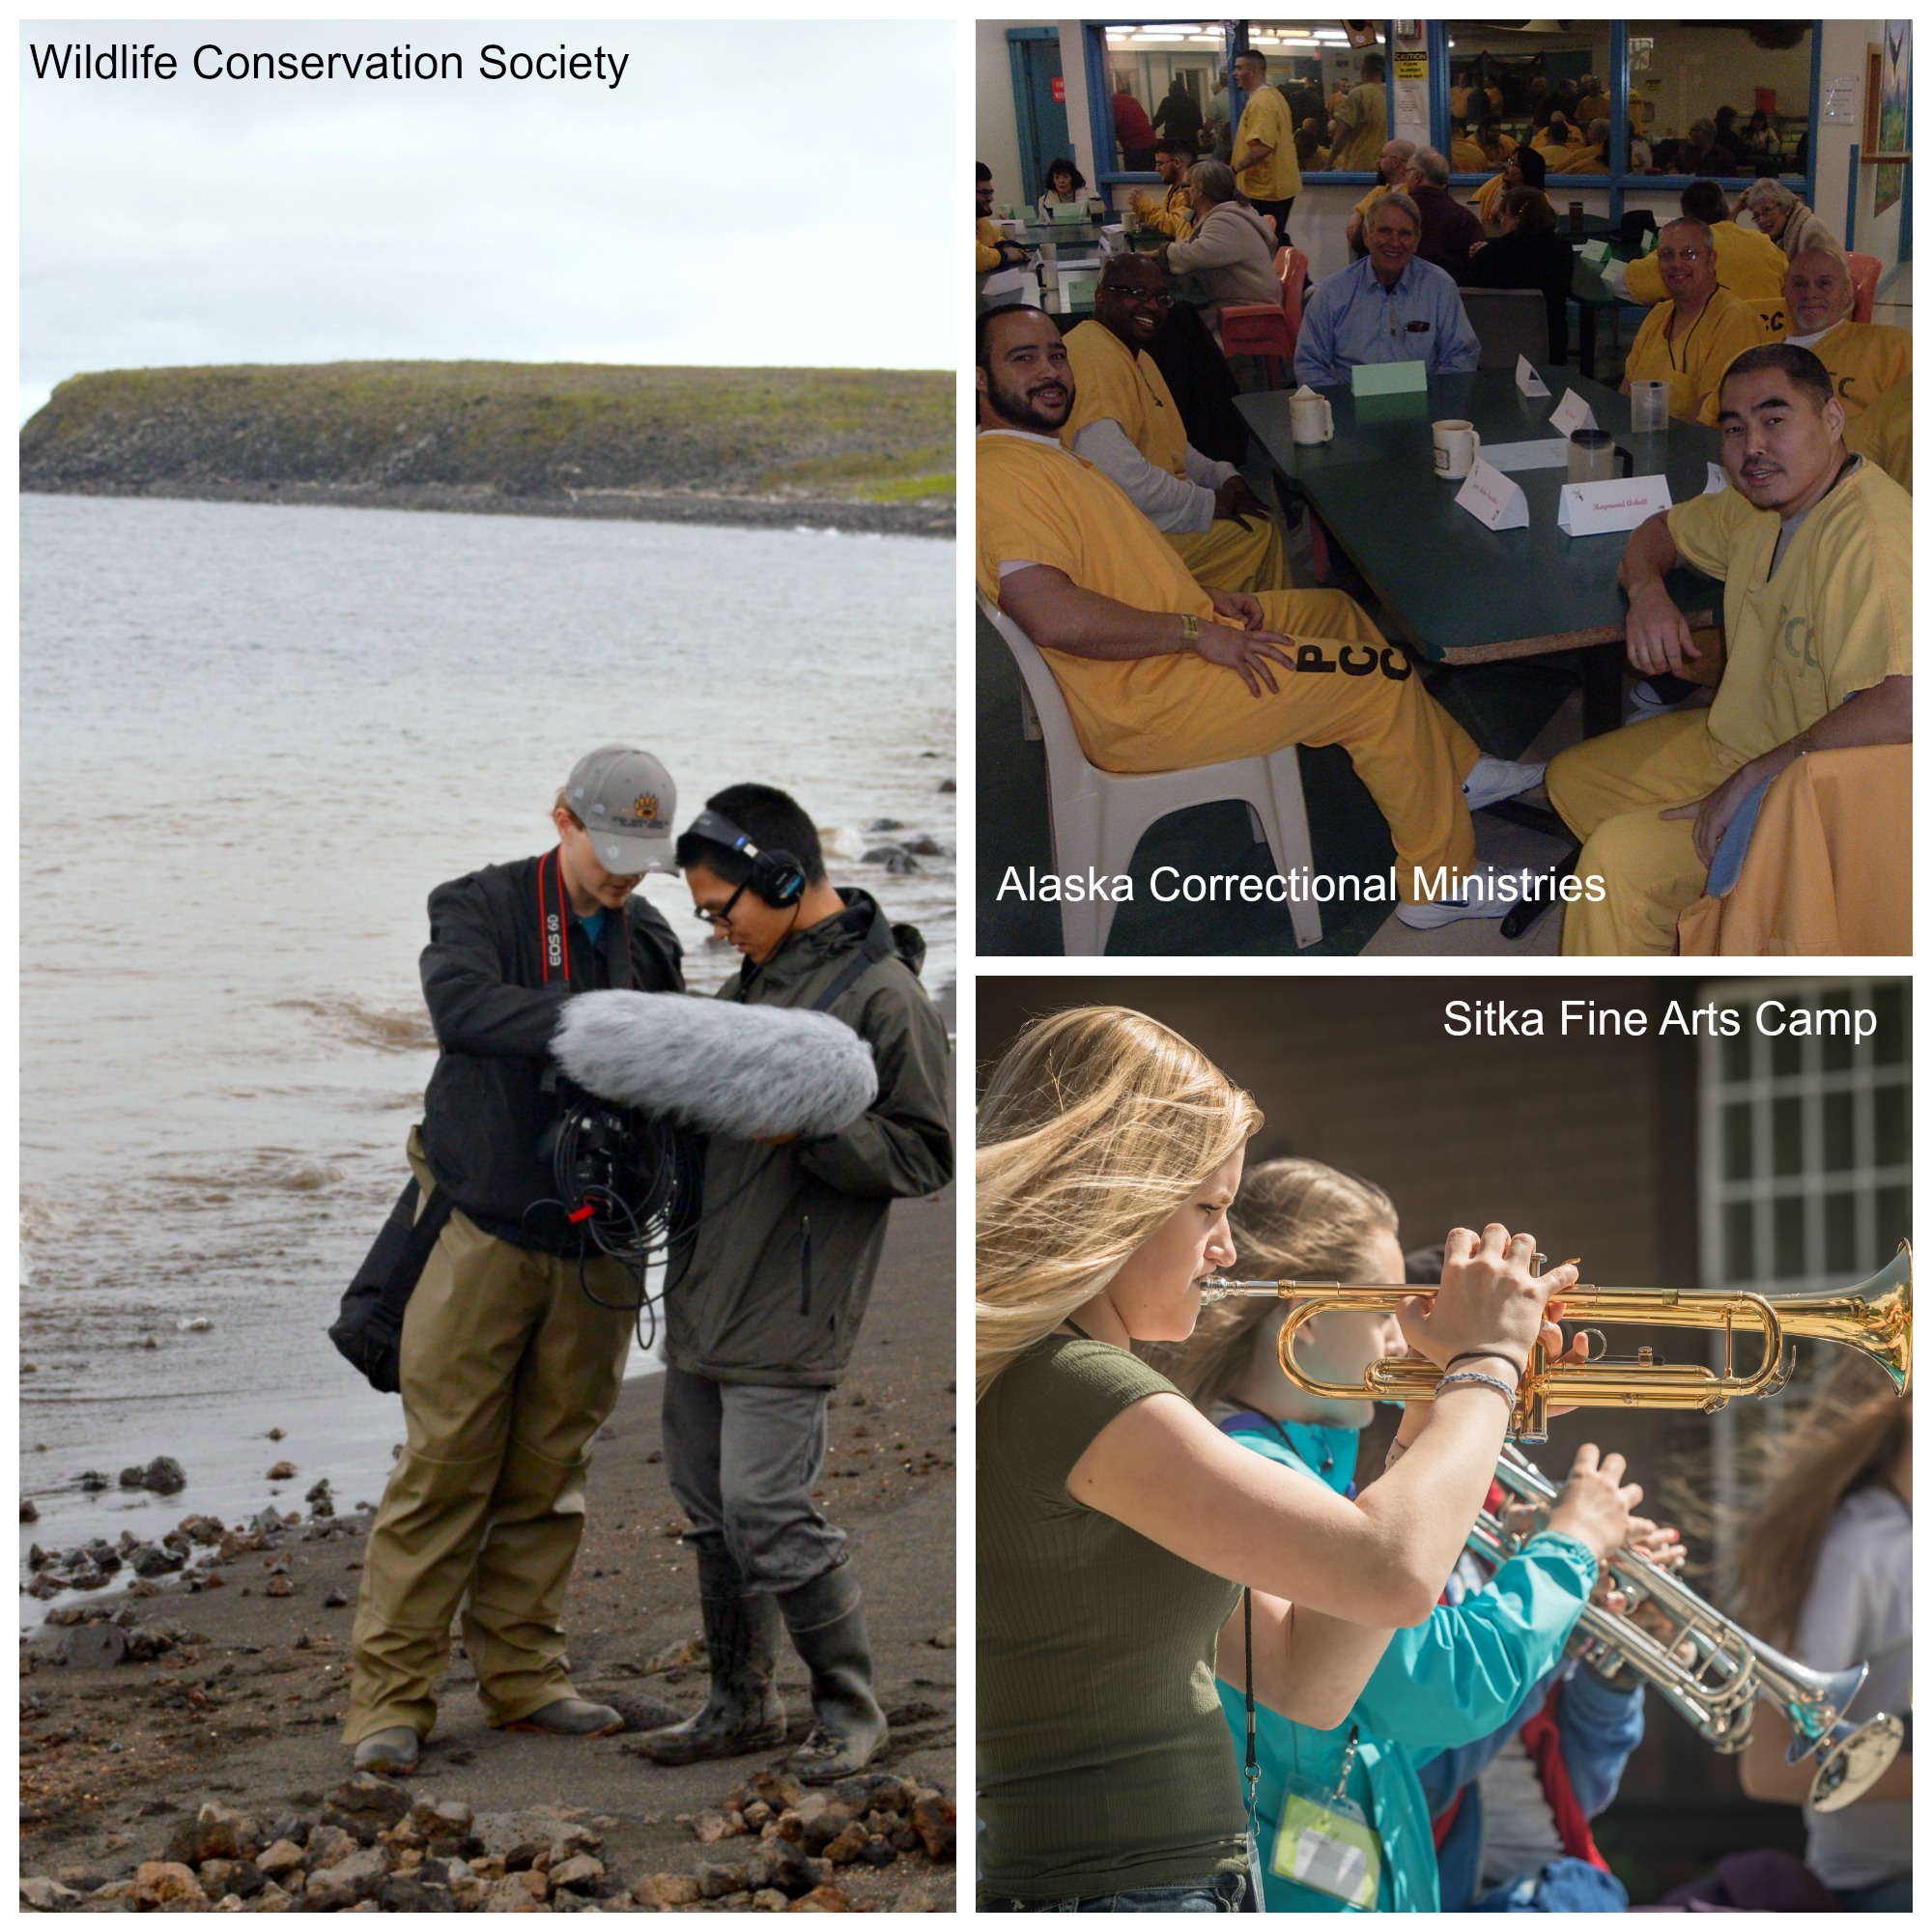 Image 1: two members of a film crew stand on the shore of water looking at their equipment. Text overlay says "Wildlife Conservation Society. Image 2: a group of men, most of them wearing yellow jumpsuits, sit around a table inside a room. Text overlay says "Alaska Correctional Ministries." Image 3: a lineup of young musicians play their instruments outside. Text overlay says "Sitka Fine Arts Camp." 